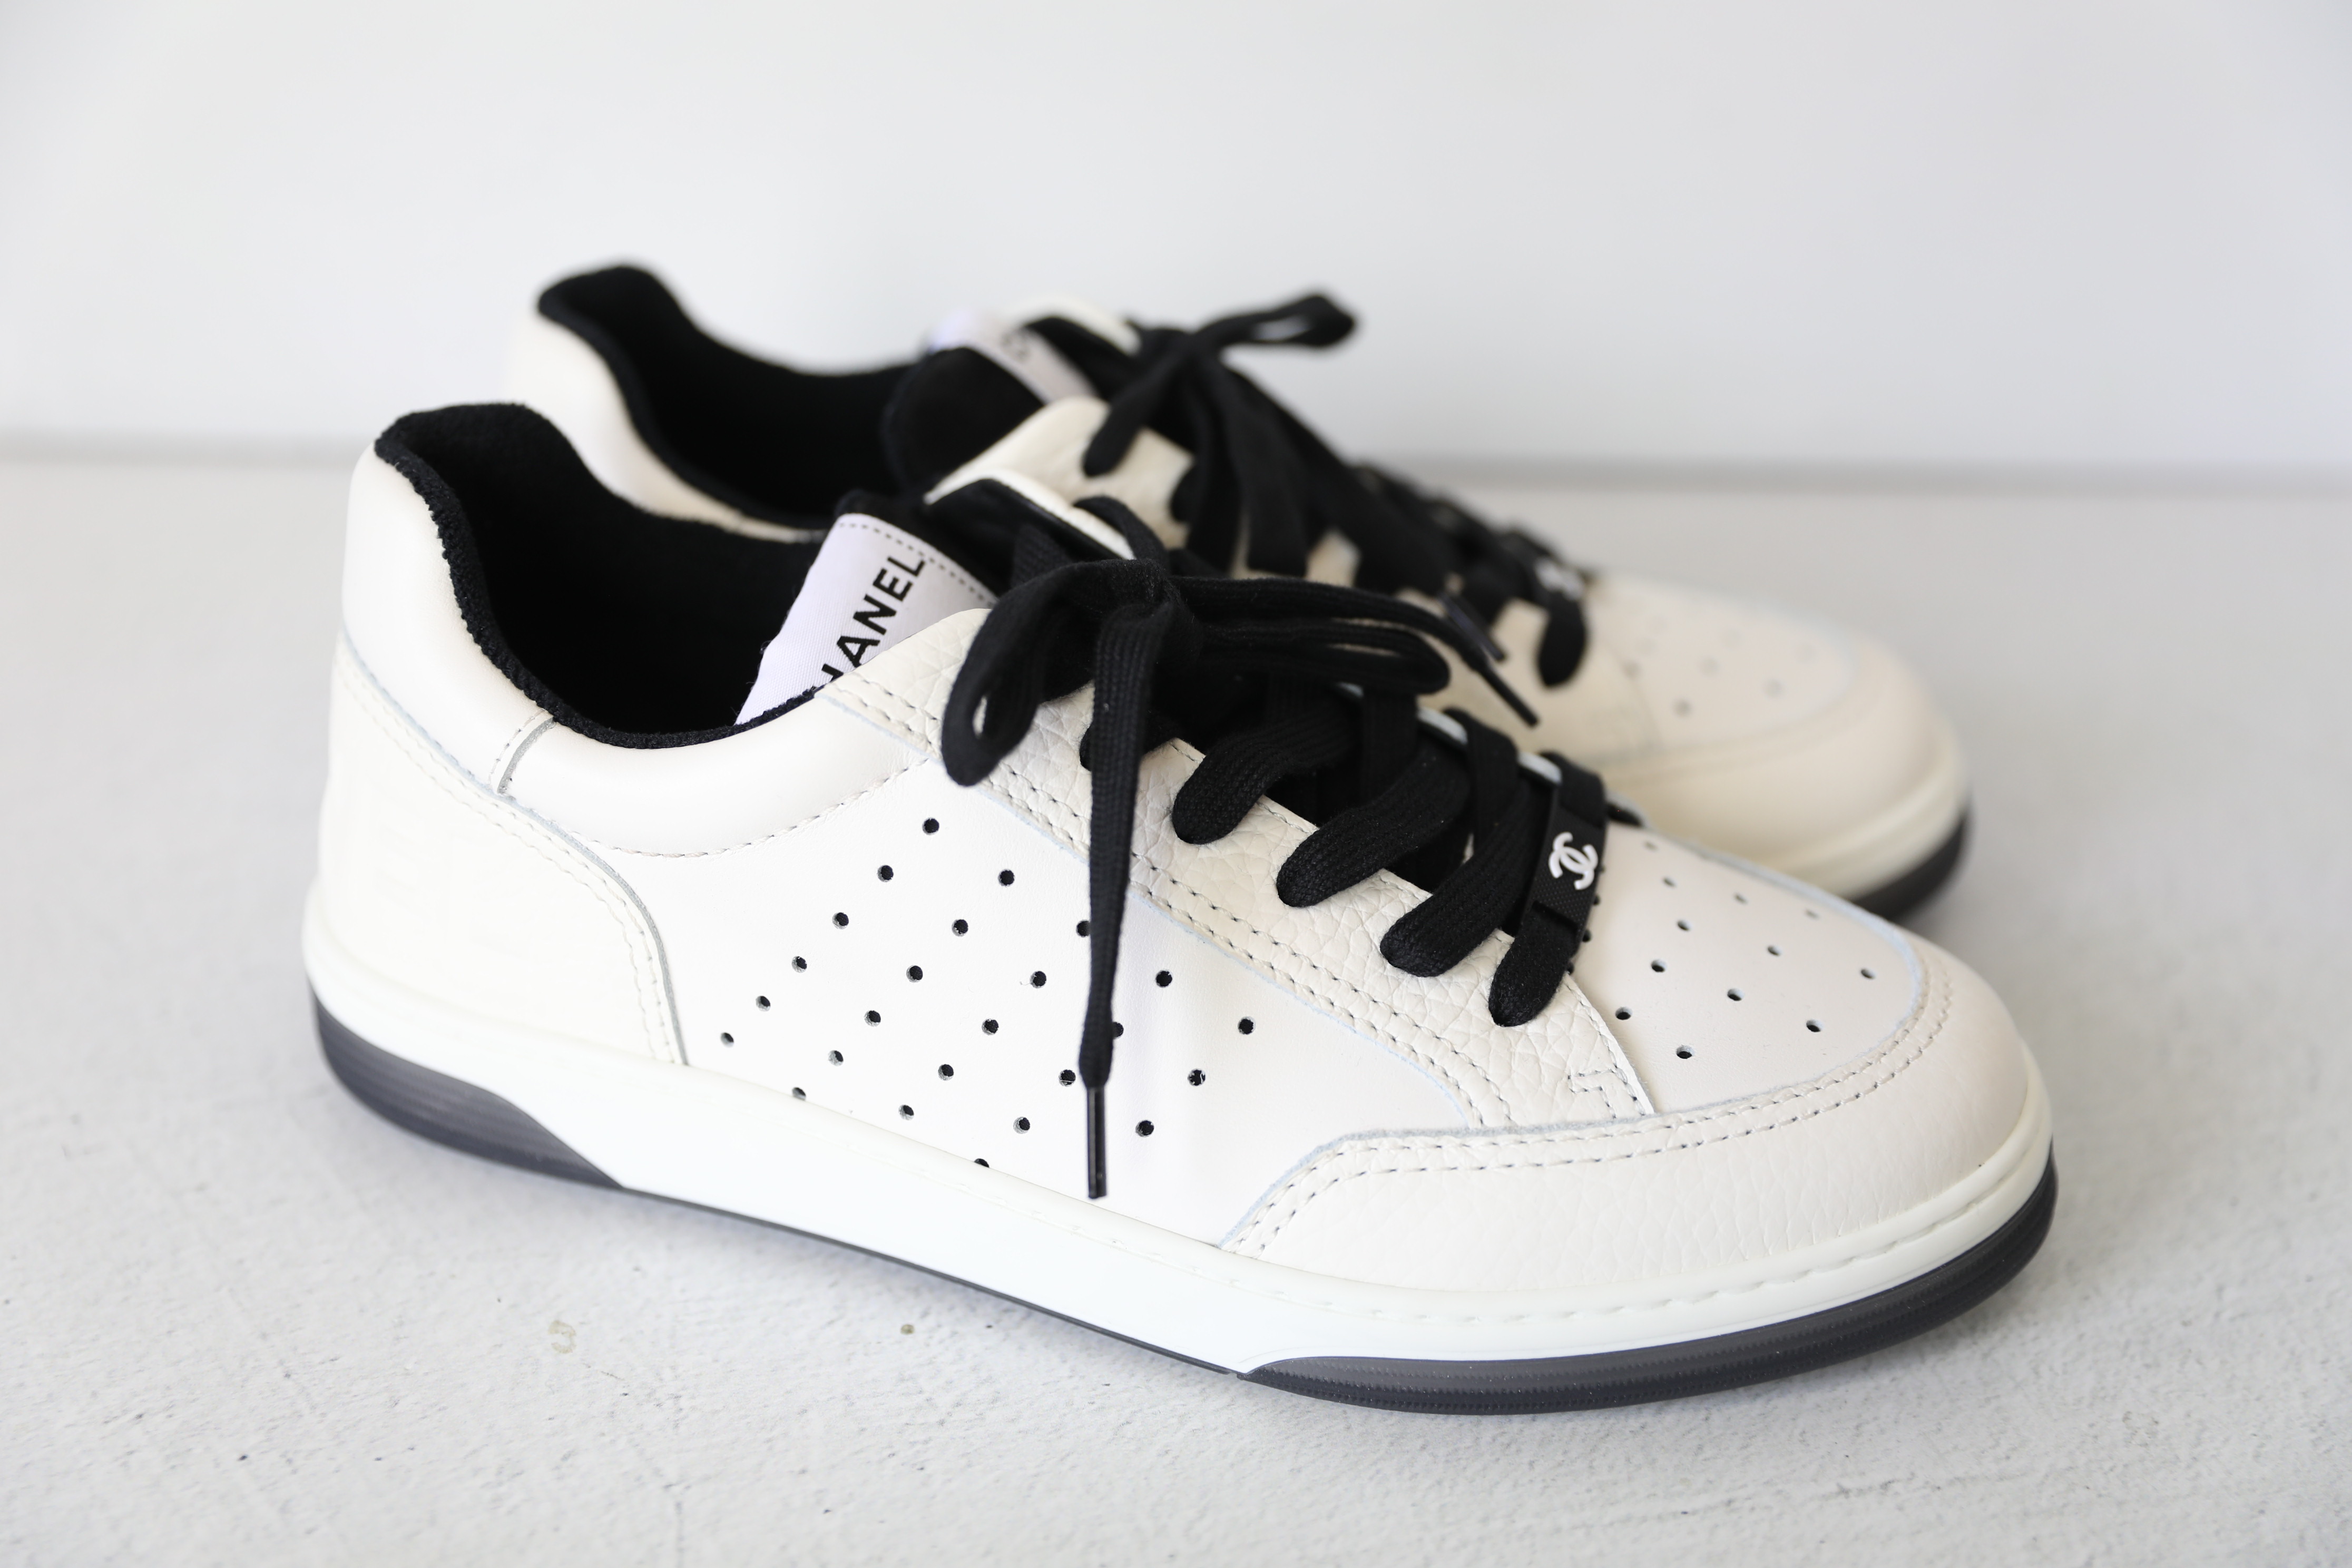 Chanel Shoes Sneakers, Black and White, Size 40, New in Box WA001